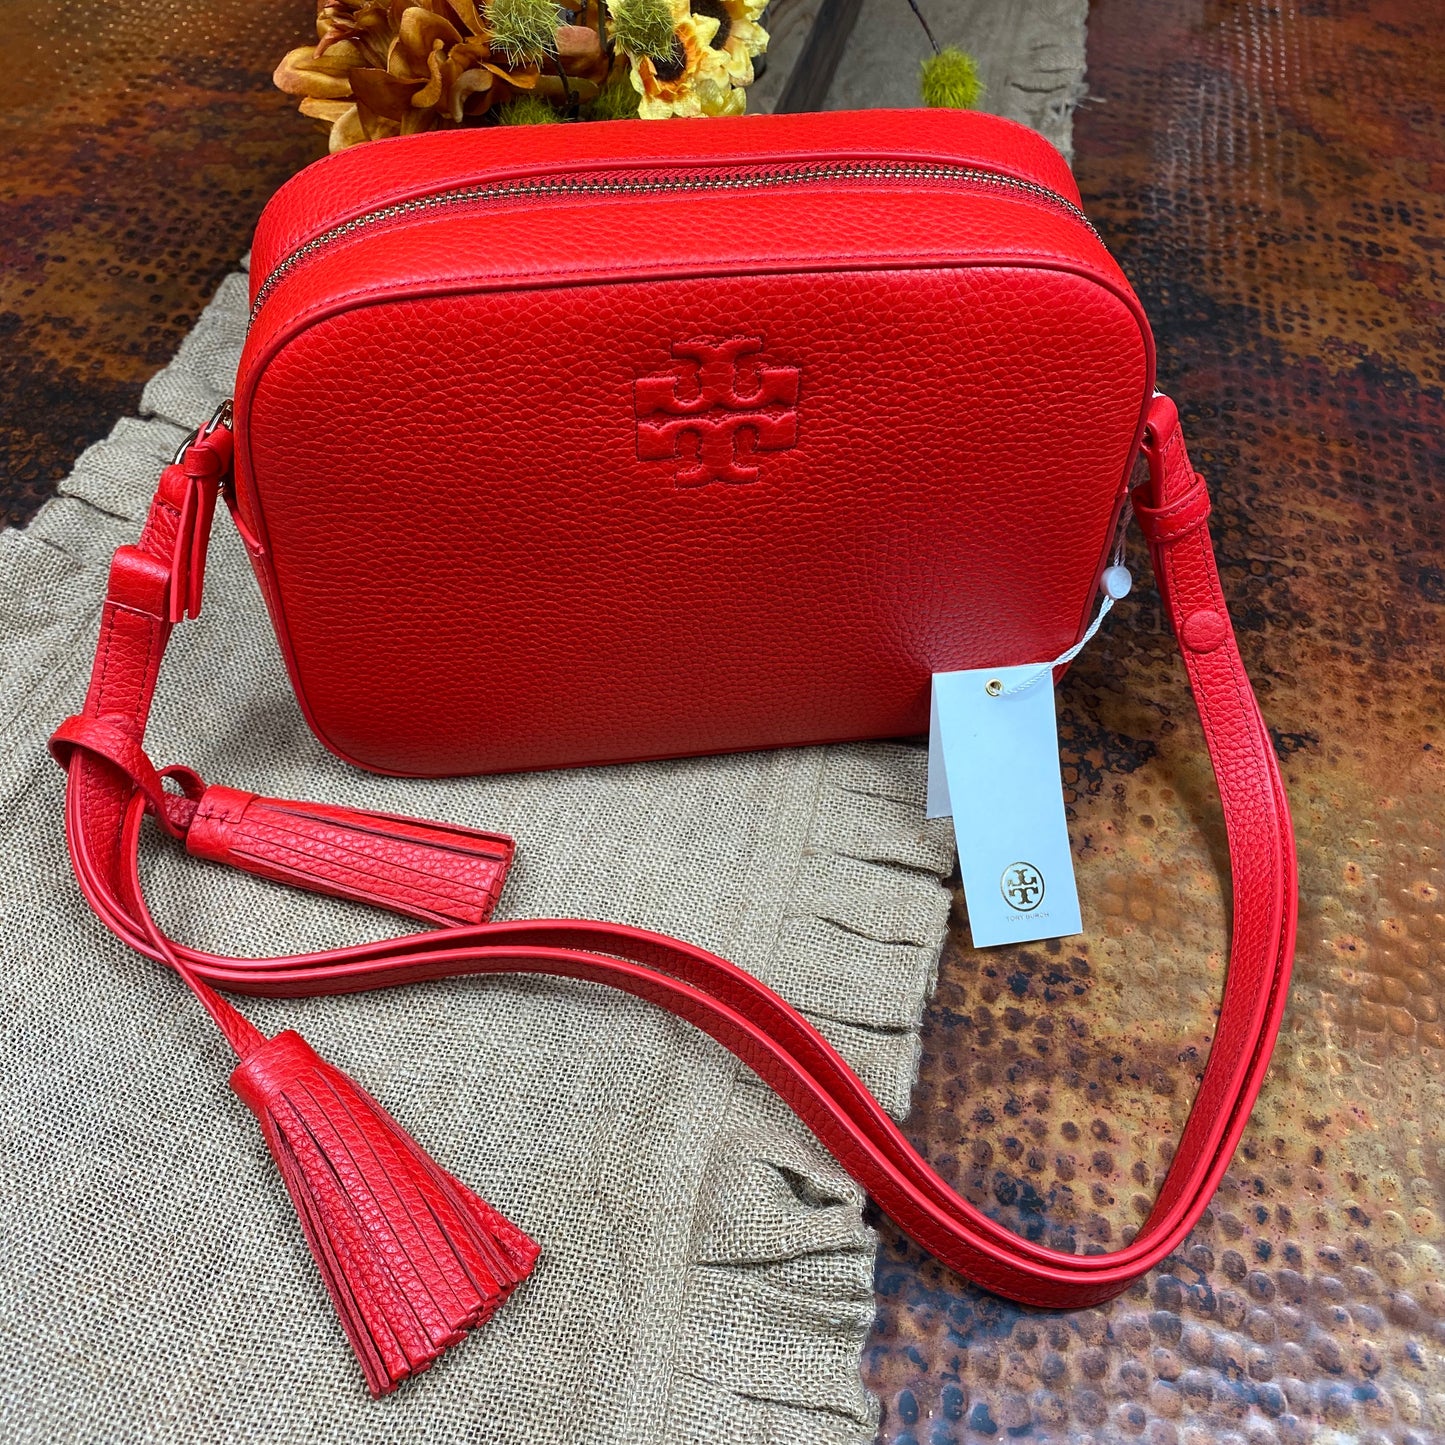 Tory Burch Thea Red Leather Convertible Bag